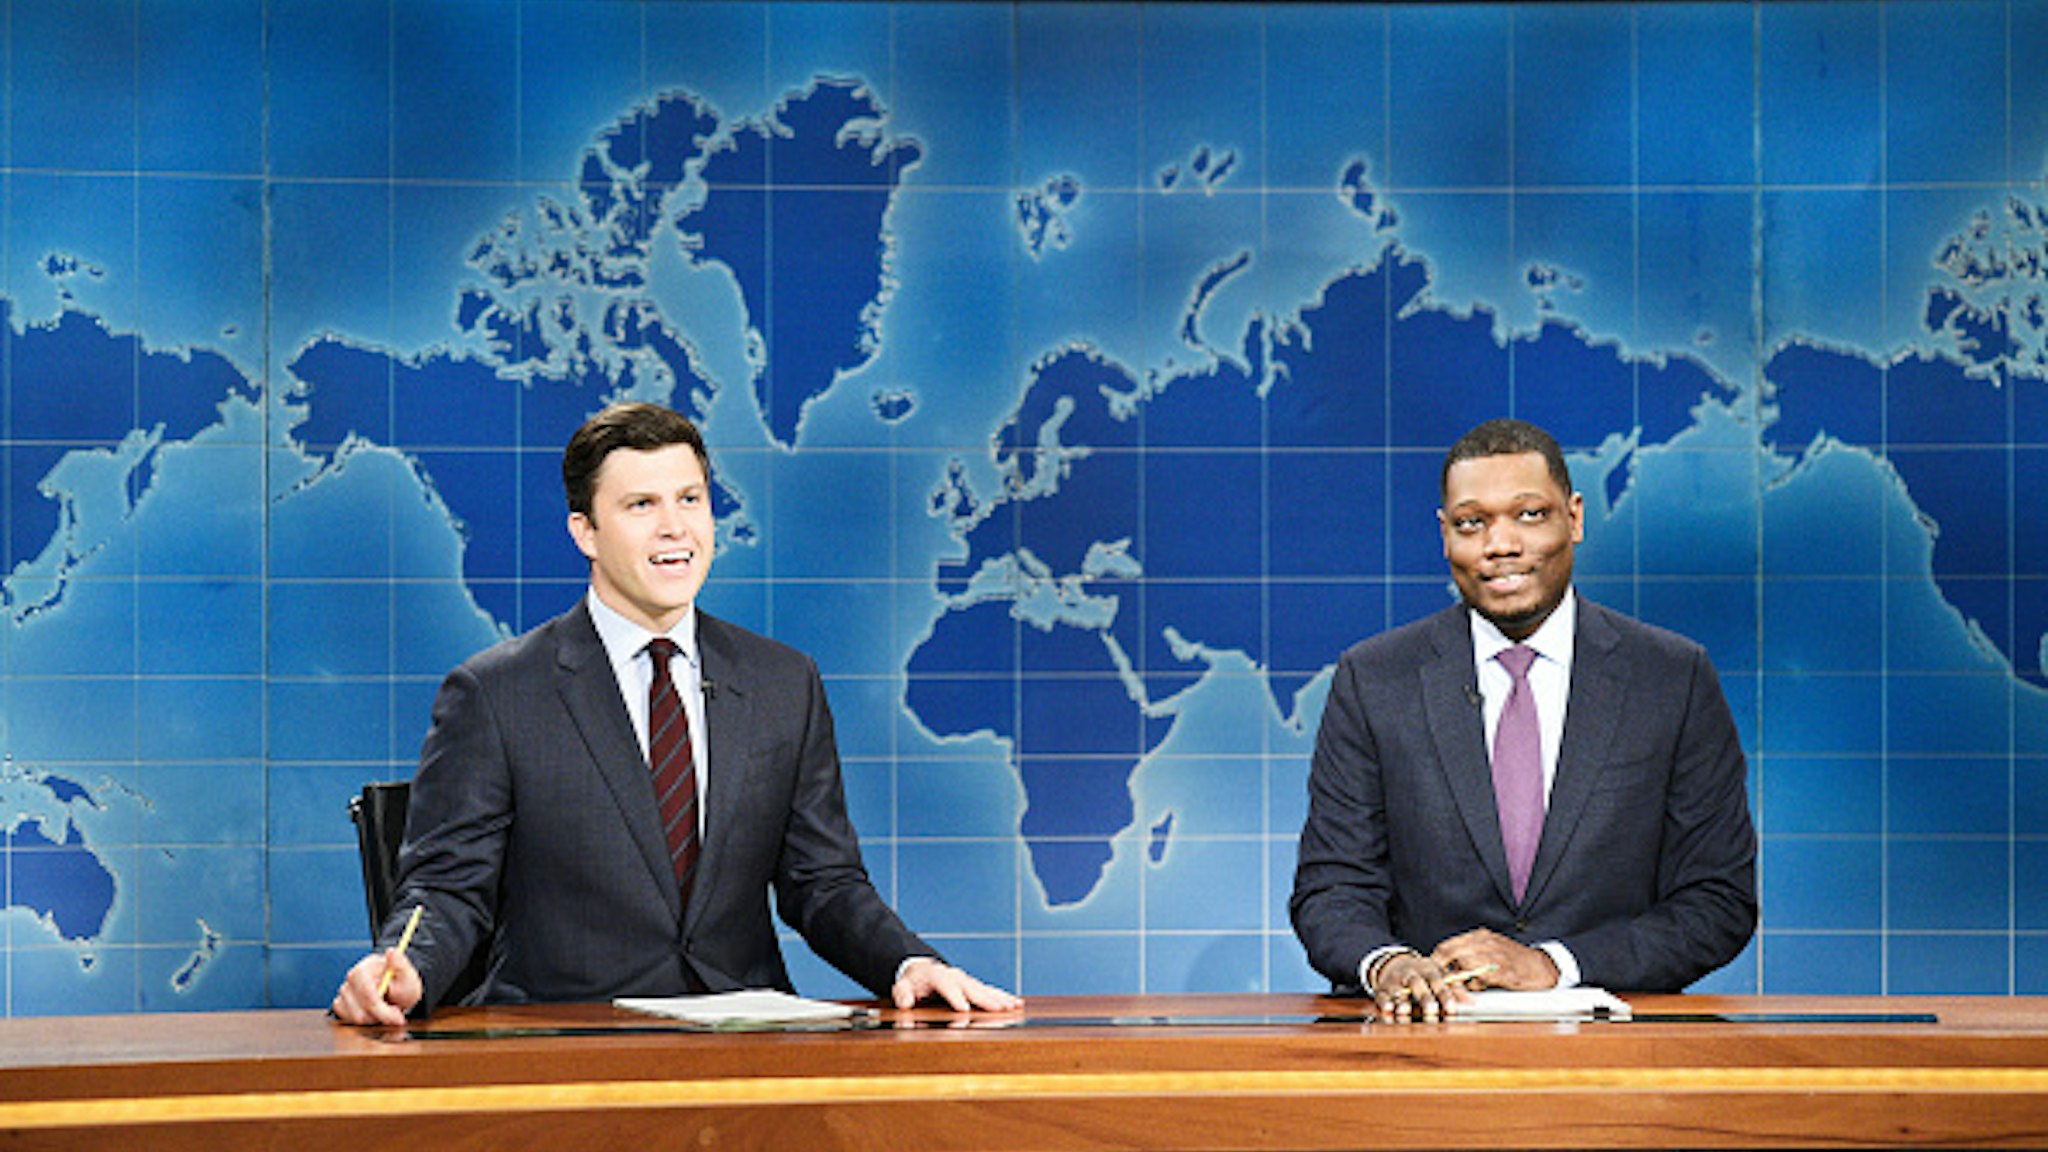 SATURDAY NIGHT LIVE -- "Paul Rudd" Episode 1767 -- Pictured: (l-r) Colin Jost, Michael Che during "Weekend Update" on May 18, 2019 --